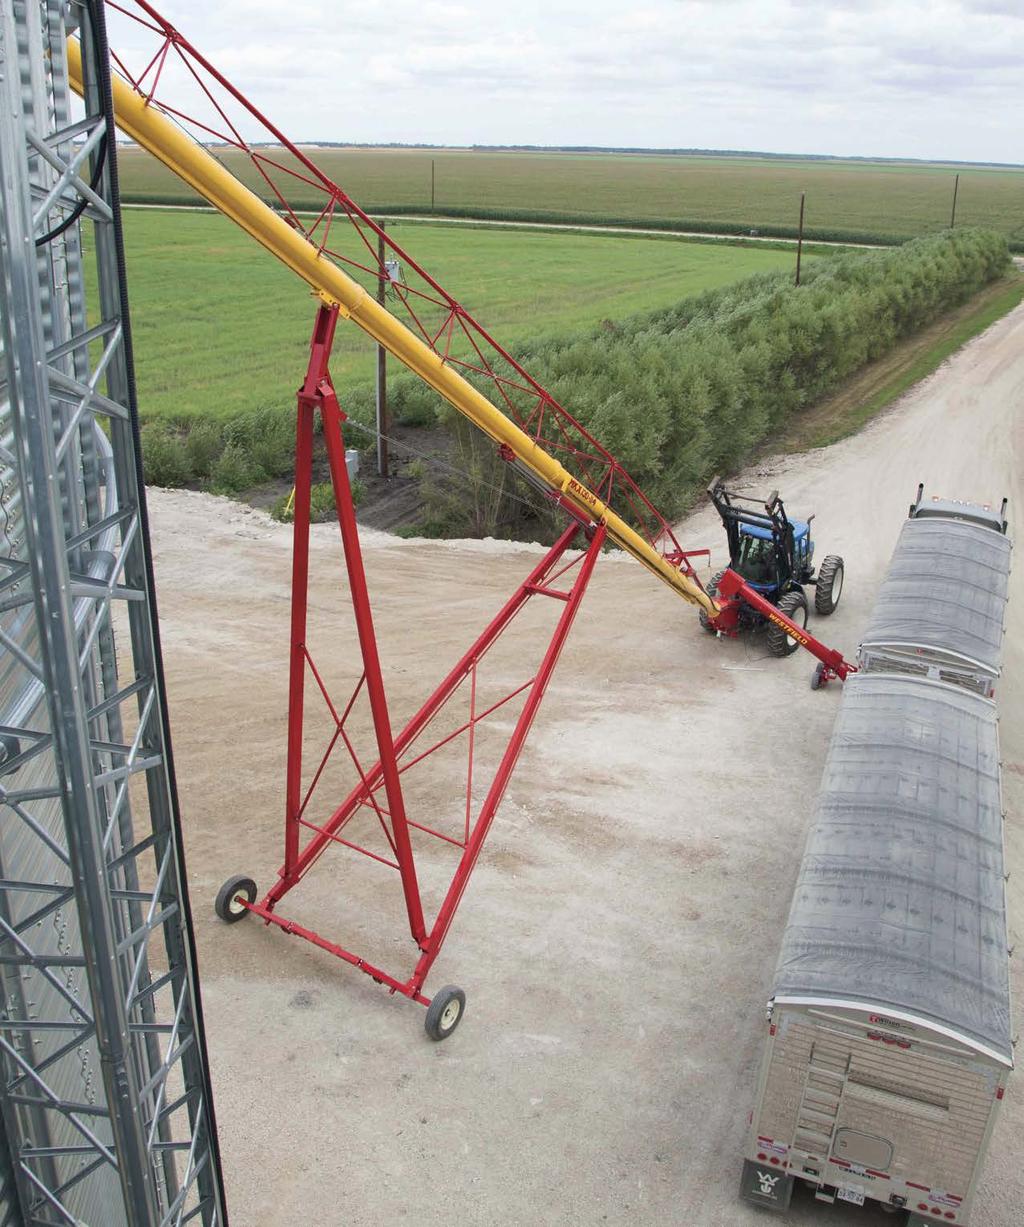 The highest capacity auger ever made by Westfield. Introducing the MKX 130 Series, available in 64' - 114' lengths with capacity up to 11,000 BPH.